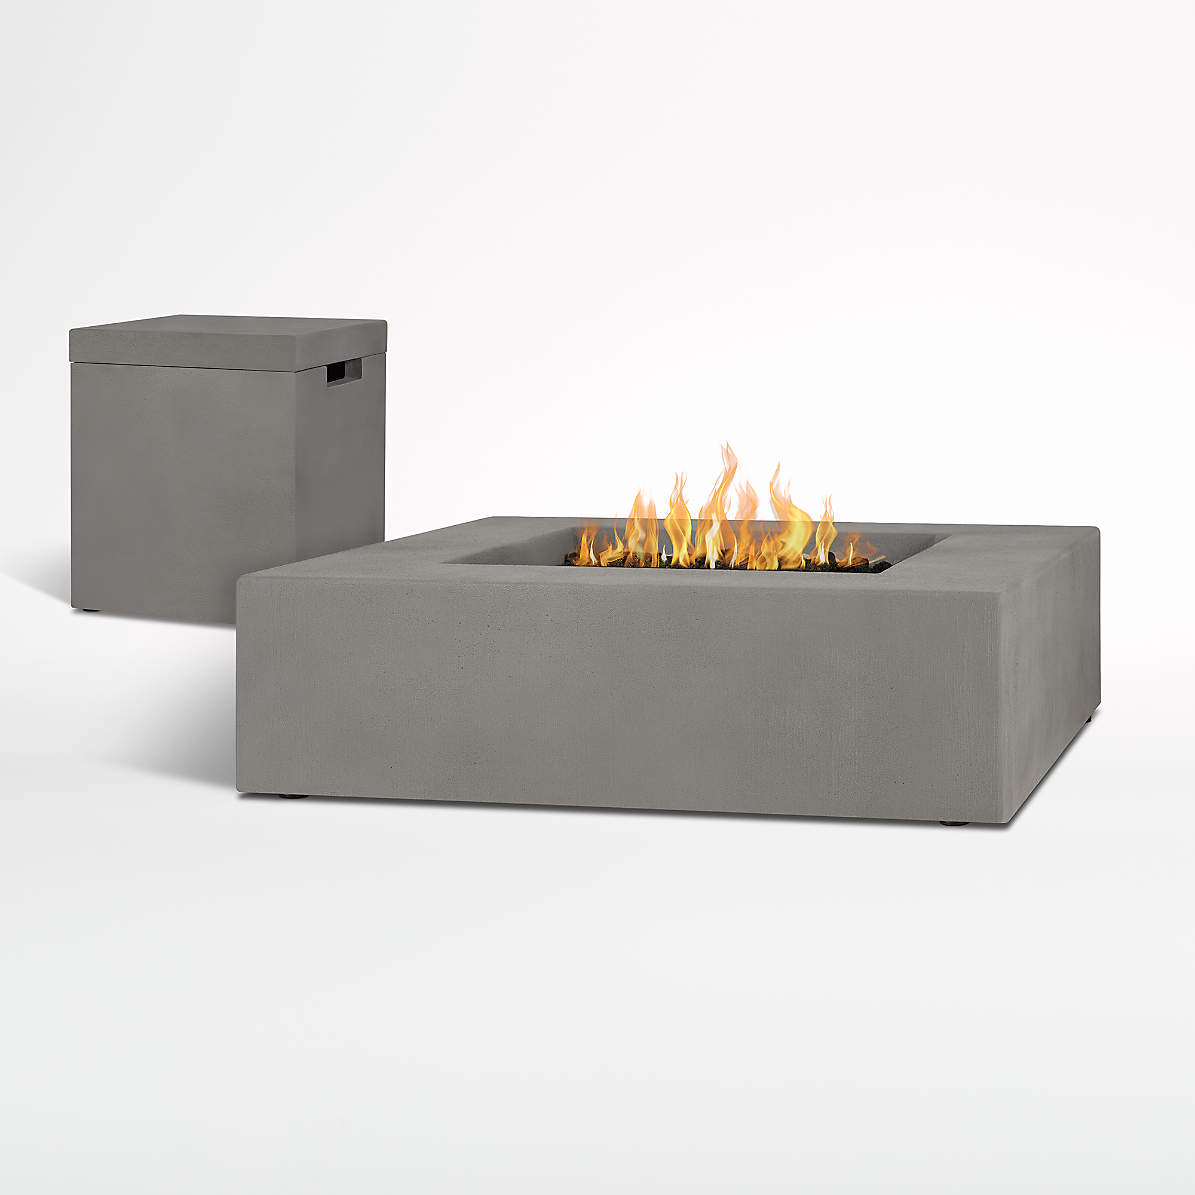 Square Propane Tank Cover Set, Do Propane Fire Pits Need To Be Covered